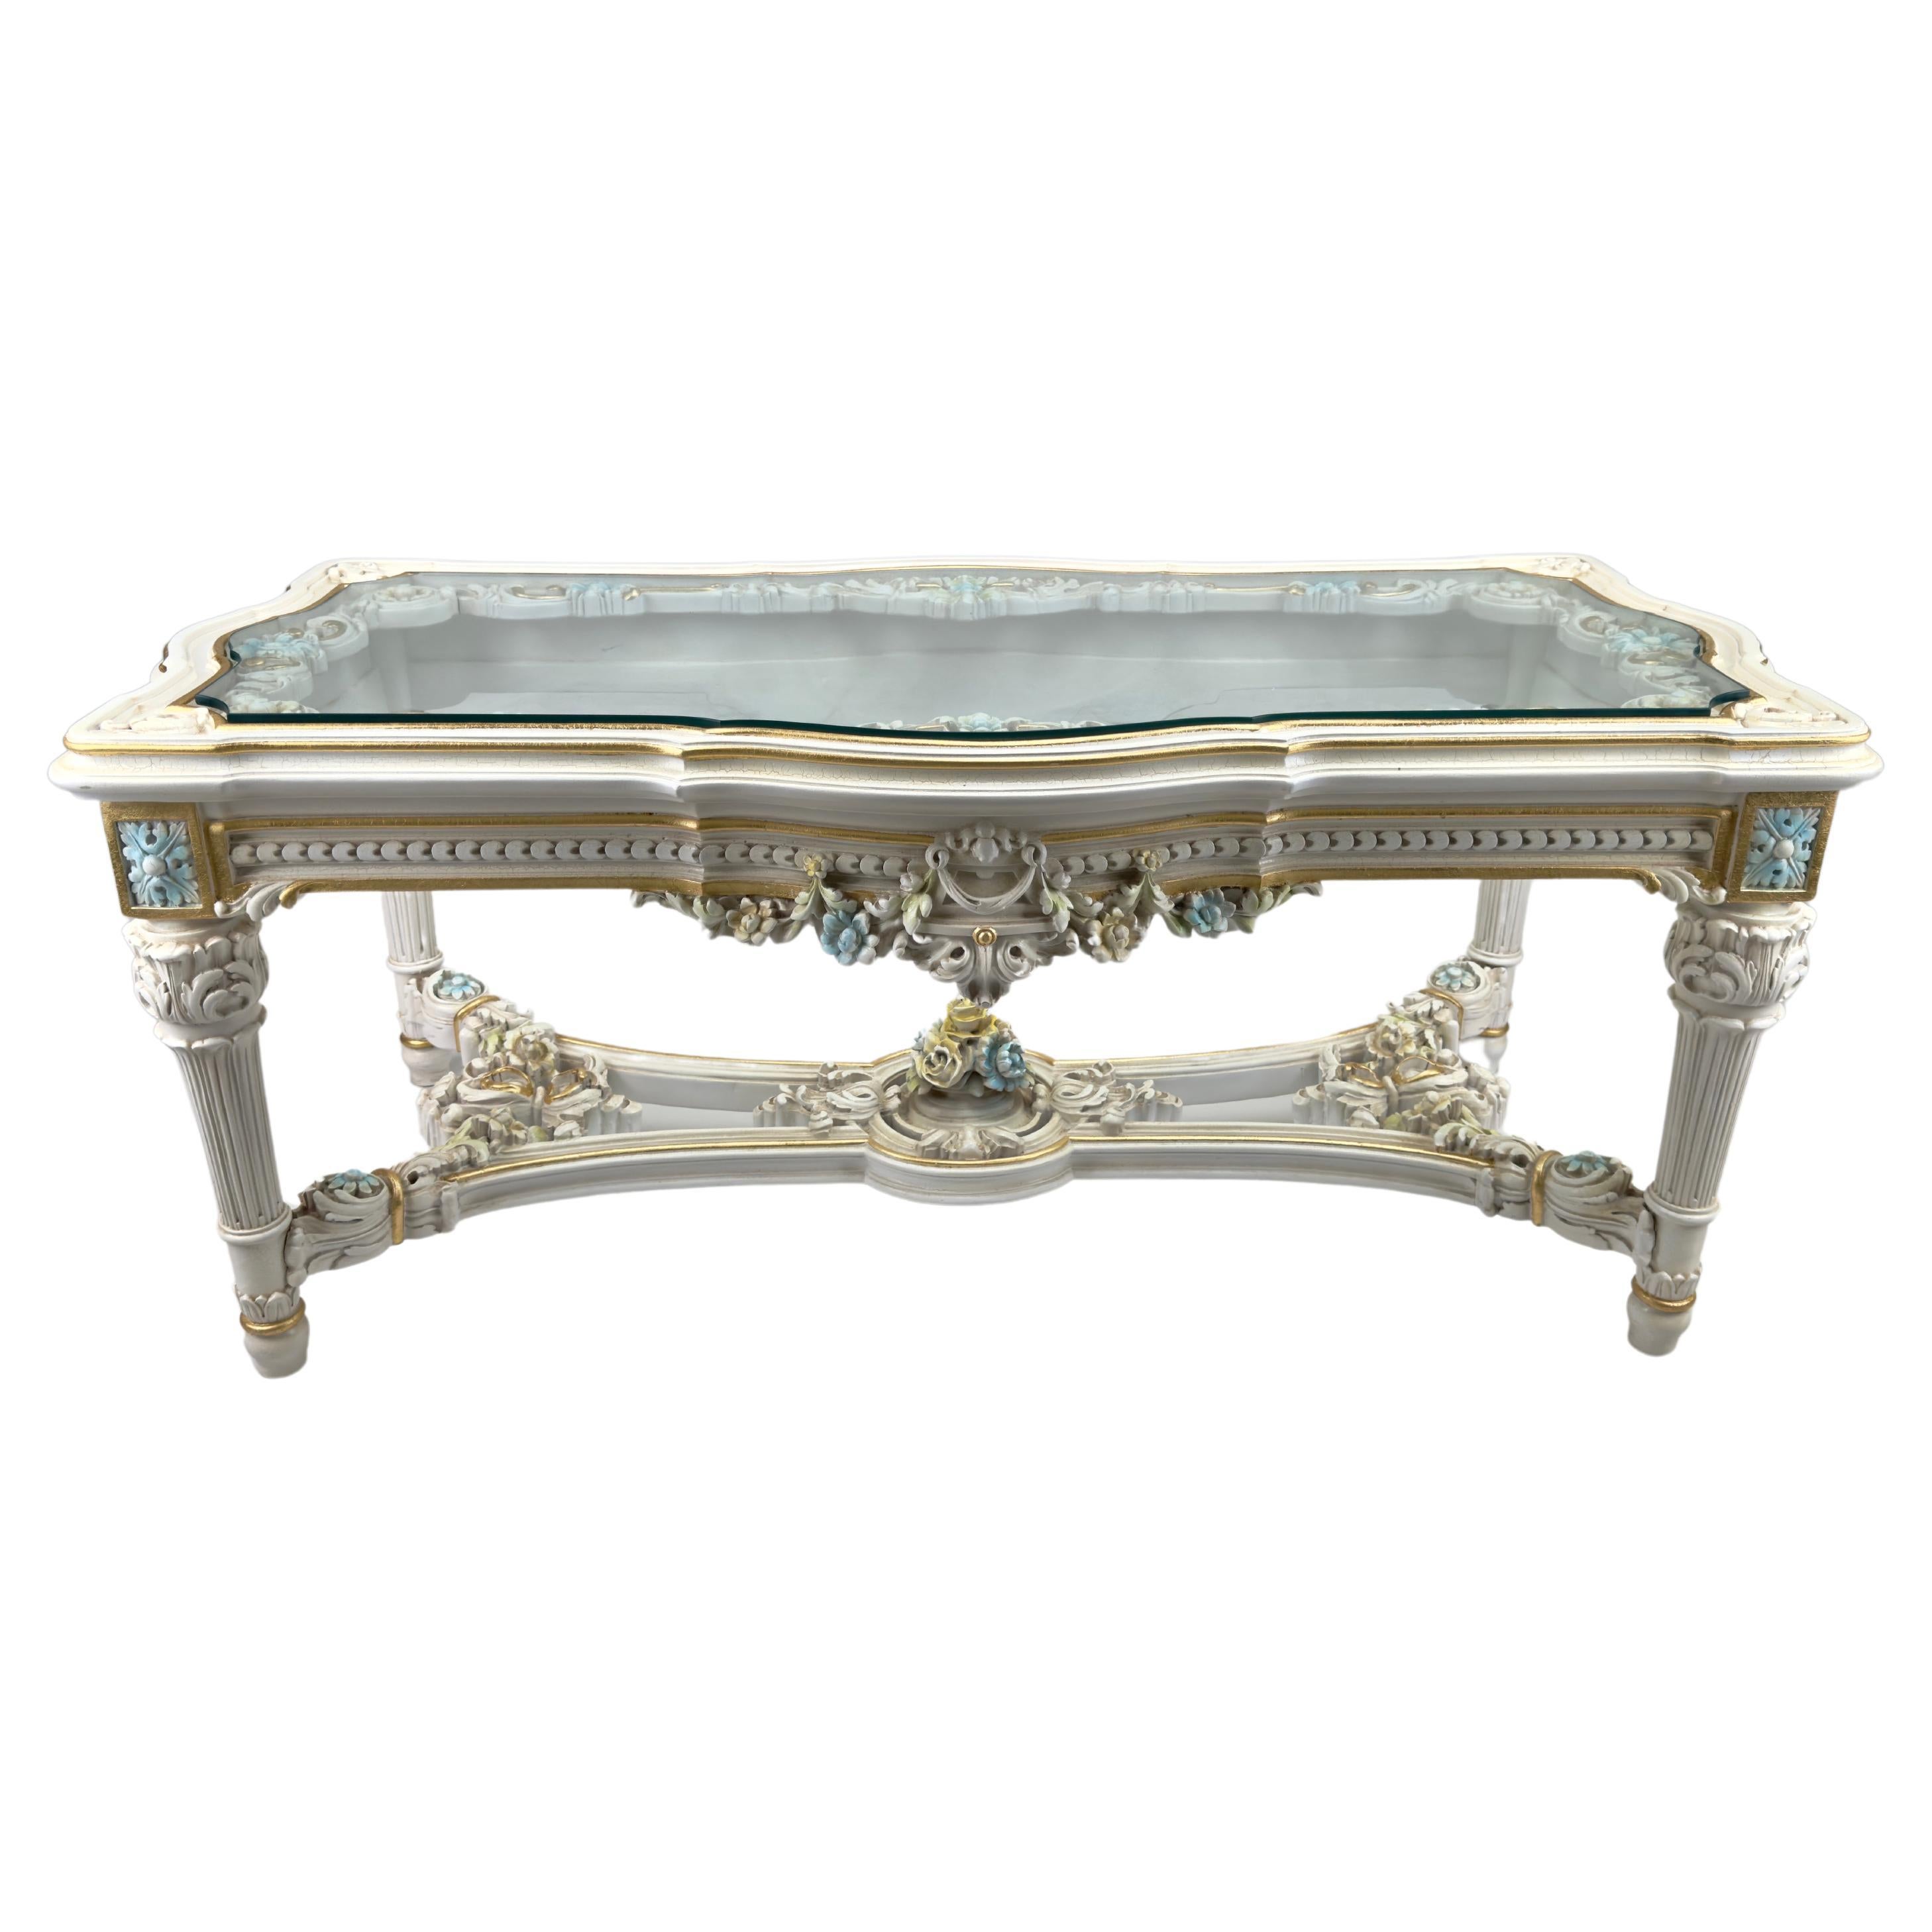 Italian Neo-Classical Baroque Style Floral Design Coffee or Cocktail Table  For Sale